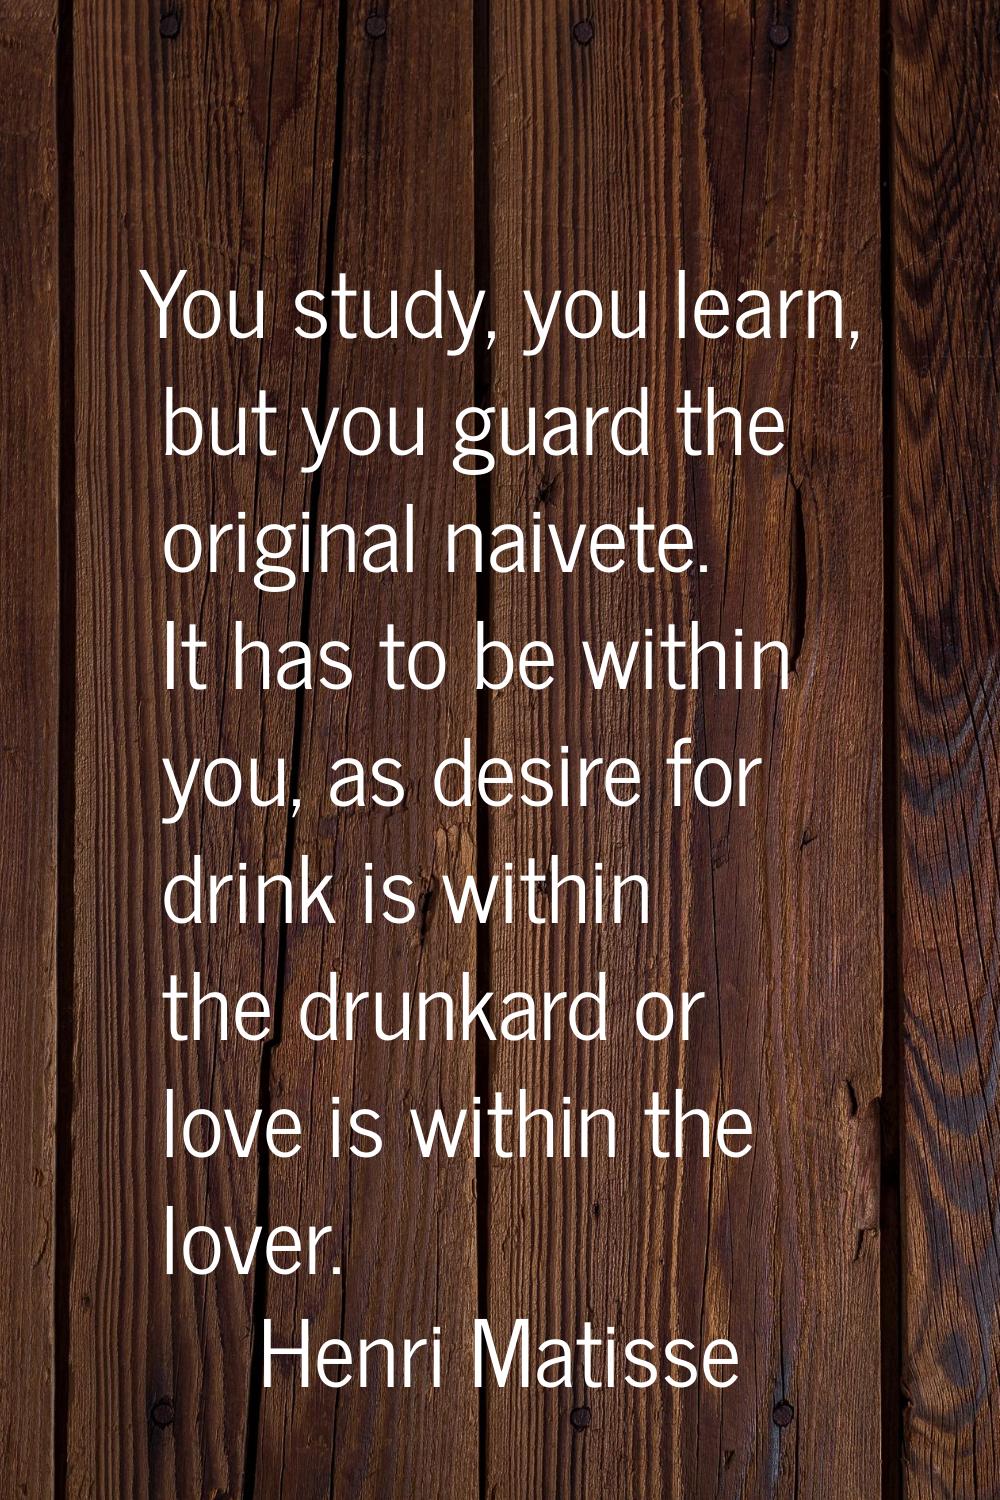 You study, you learn, but you guard the original naivete. It has to be within you, as desire for dr